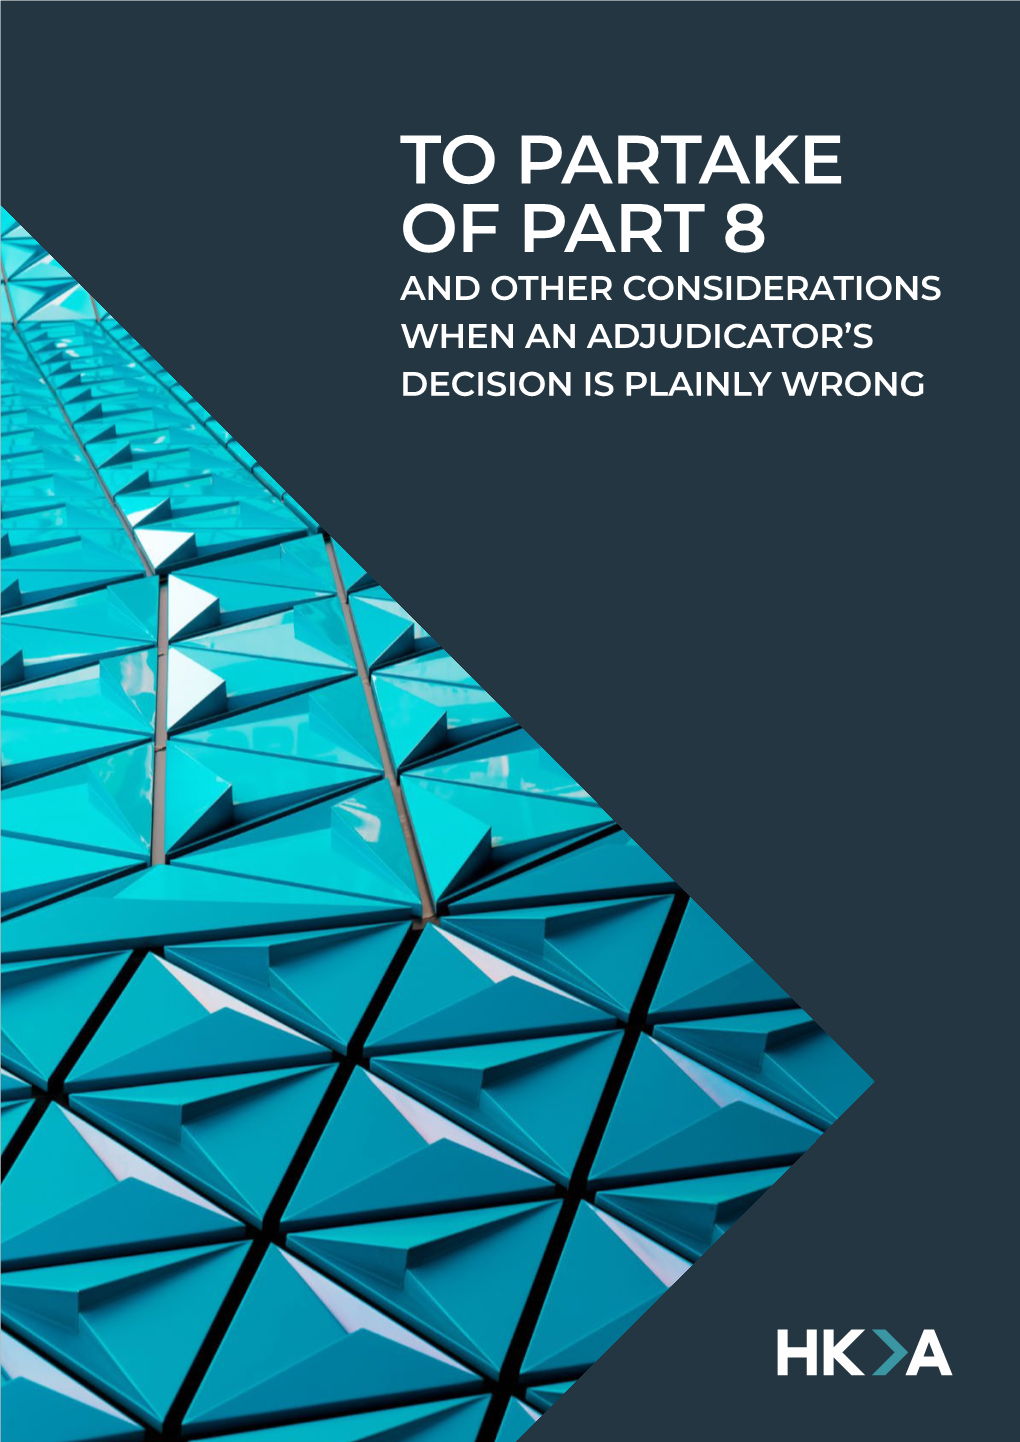 To Partake of Part 8 and Other Considerations When an Adjudicator’S Decision Is Plainly Wrong Contents